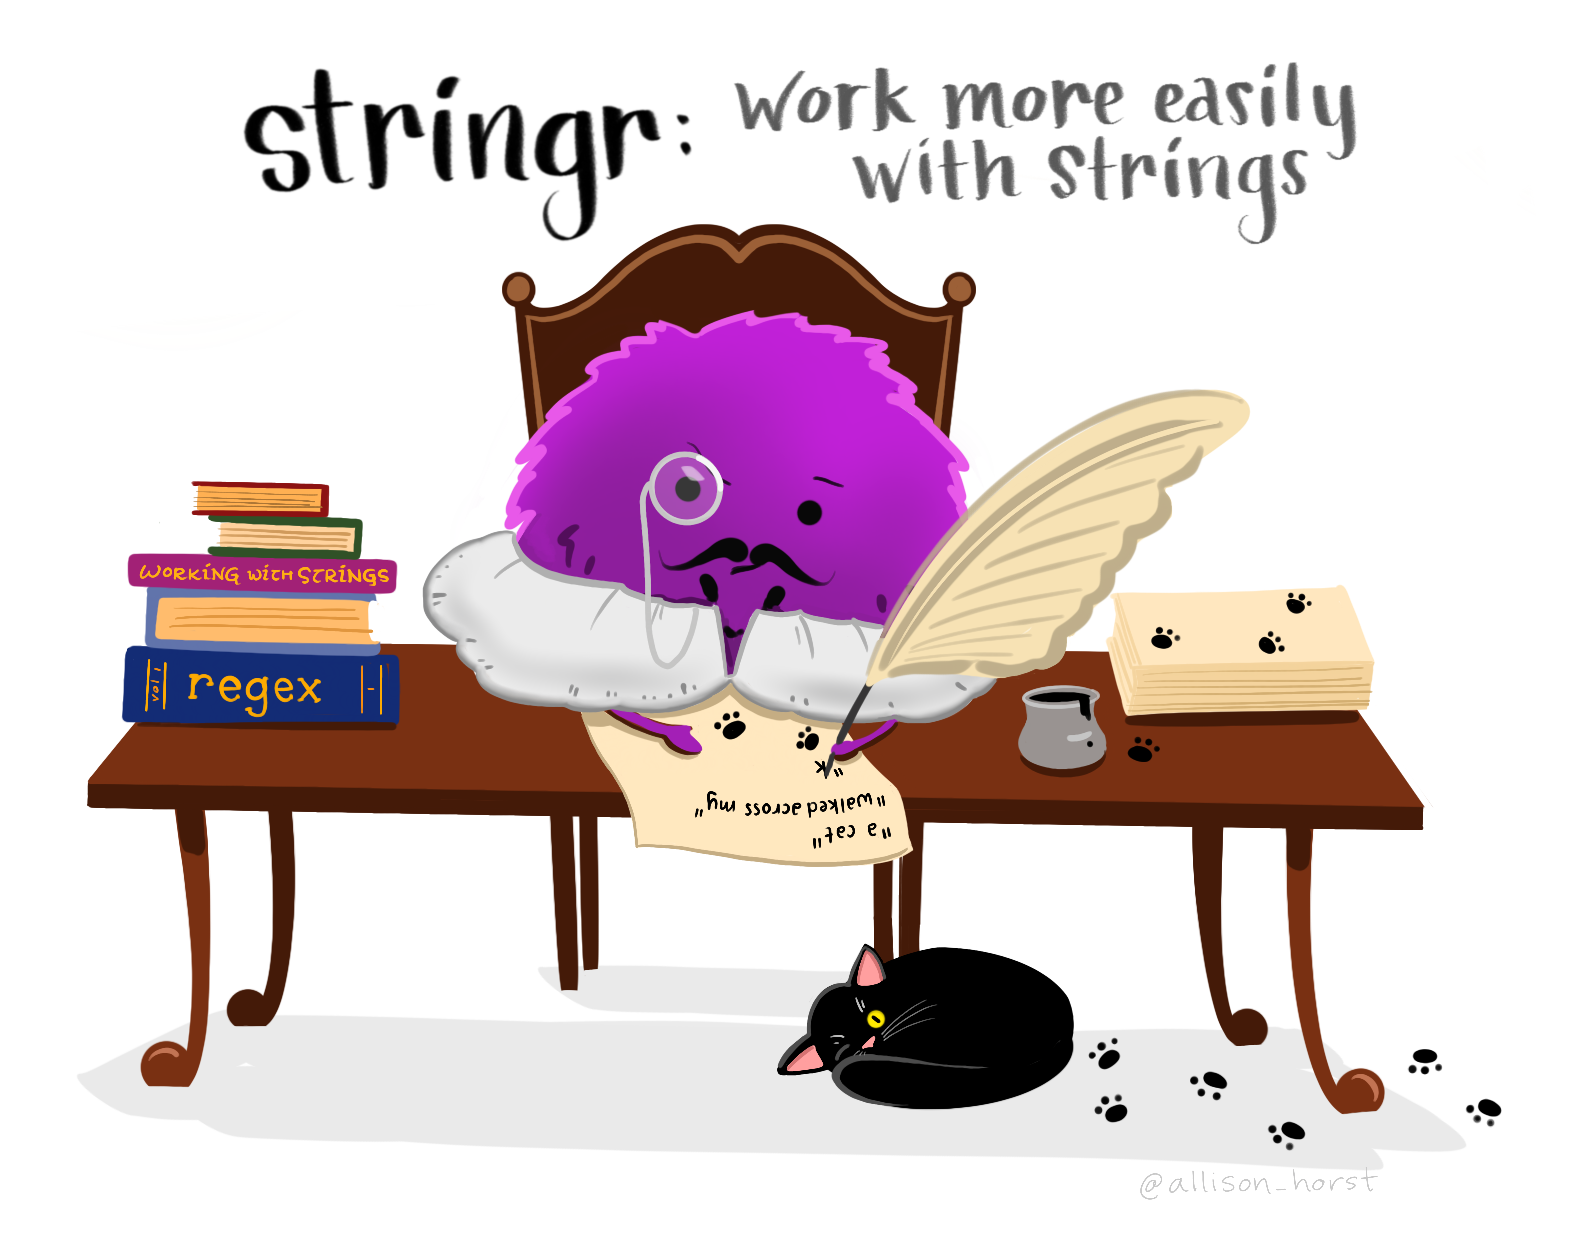 stringr: work more easily with strings. Below, and illustration of a purple fuzzy monster at a desk, in a Shakespeare-style fancy collar and monacle, writing a cat walked across my on a piece of paper with a large feather pen. Next to him are a stack of books titled regex and working with strings. Below the desk are cat prints (from walking through pen ink) and a curled up black cat with one eye open. This is a nod to regex often being described as looking like a cat walked over your keyboard. Learn more about stringr.